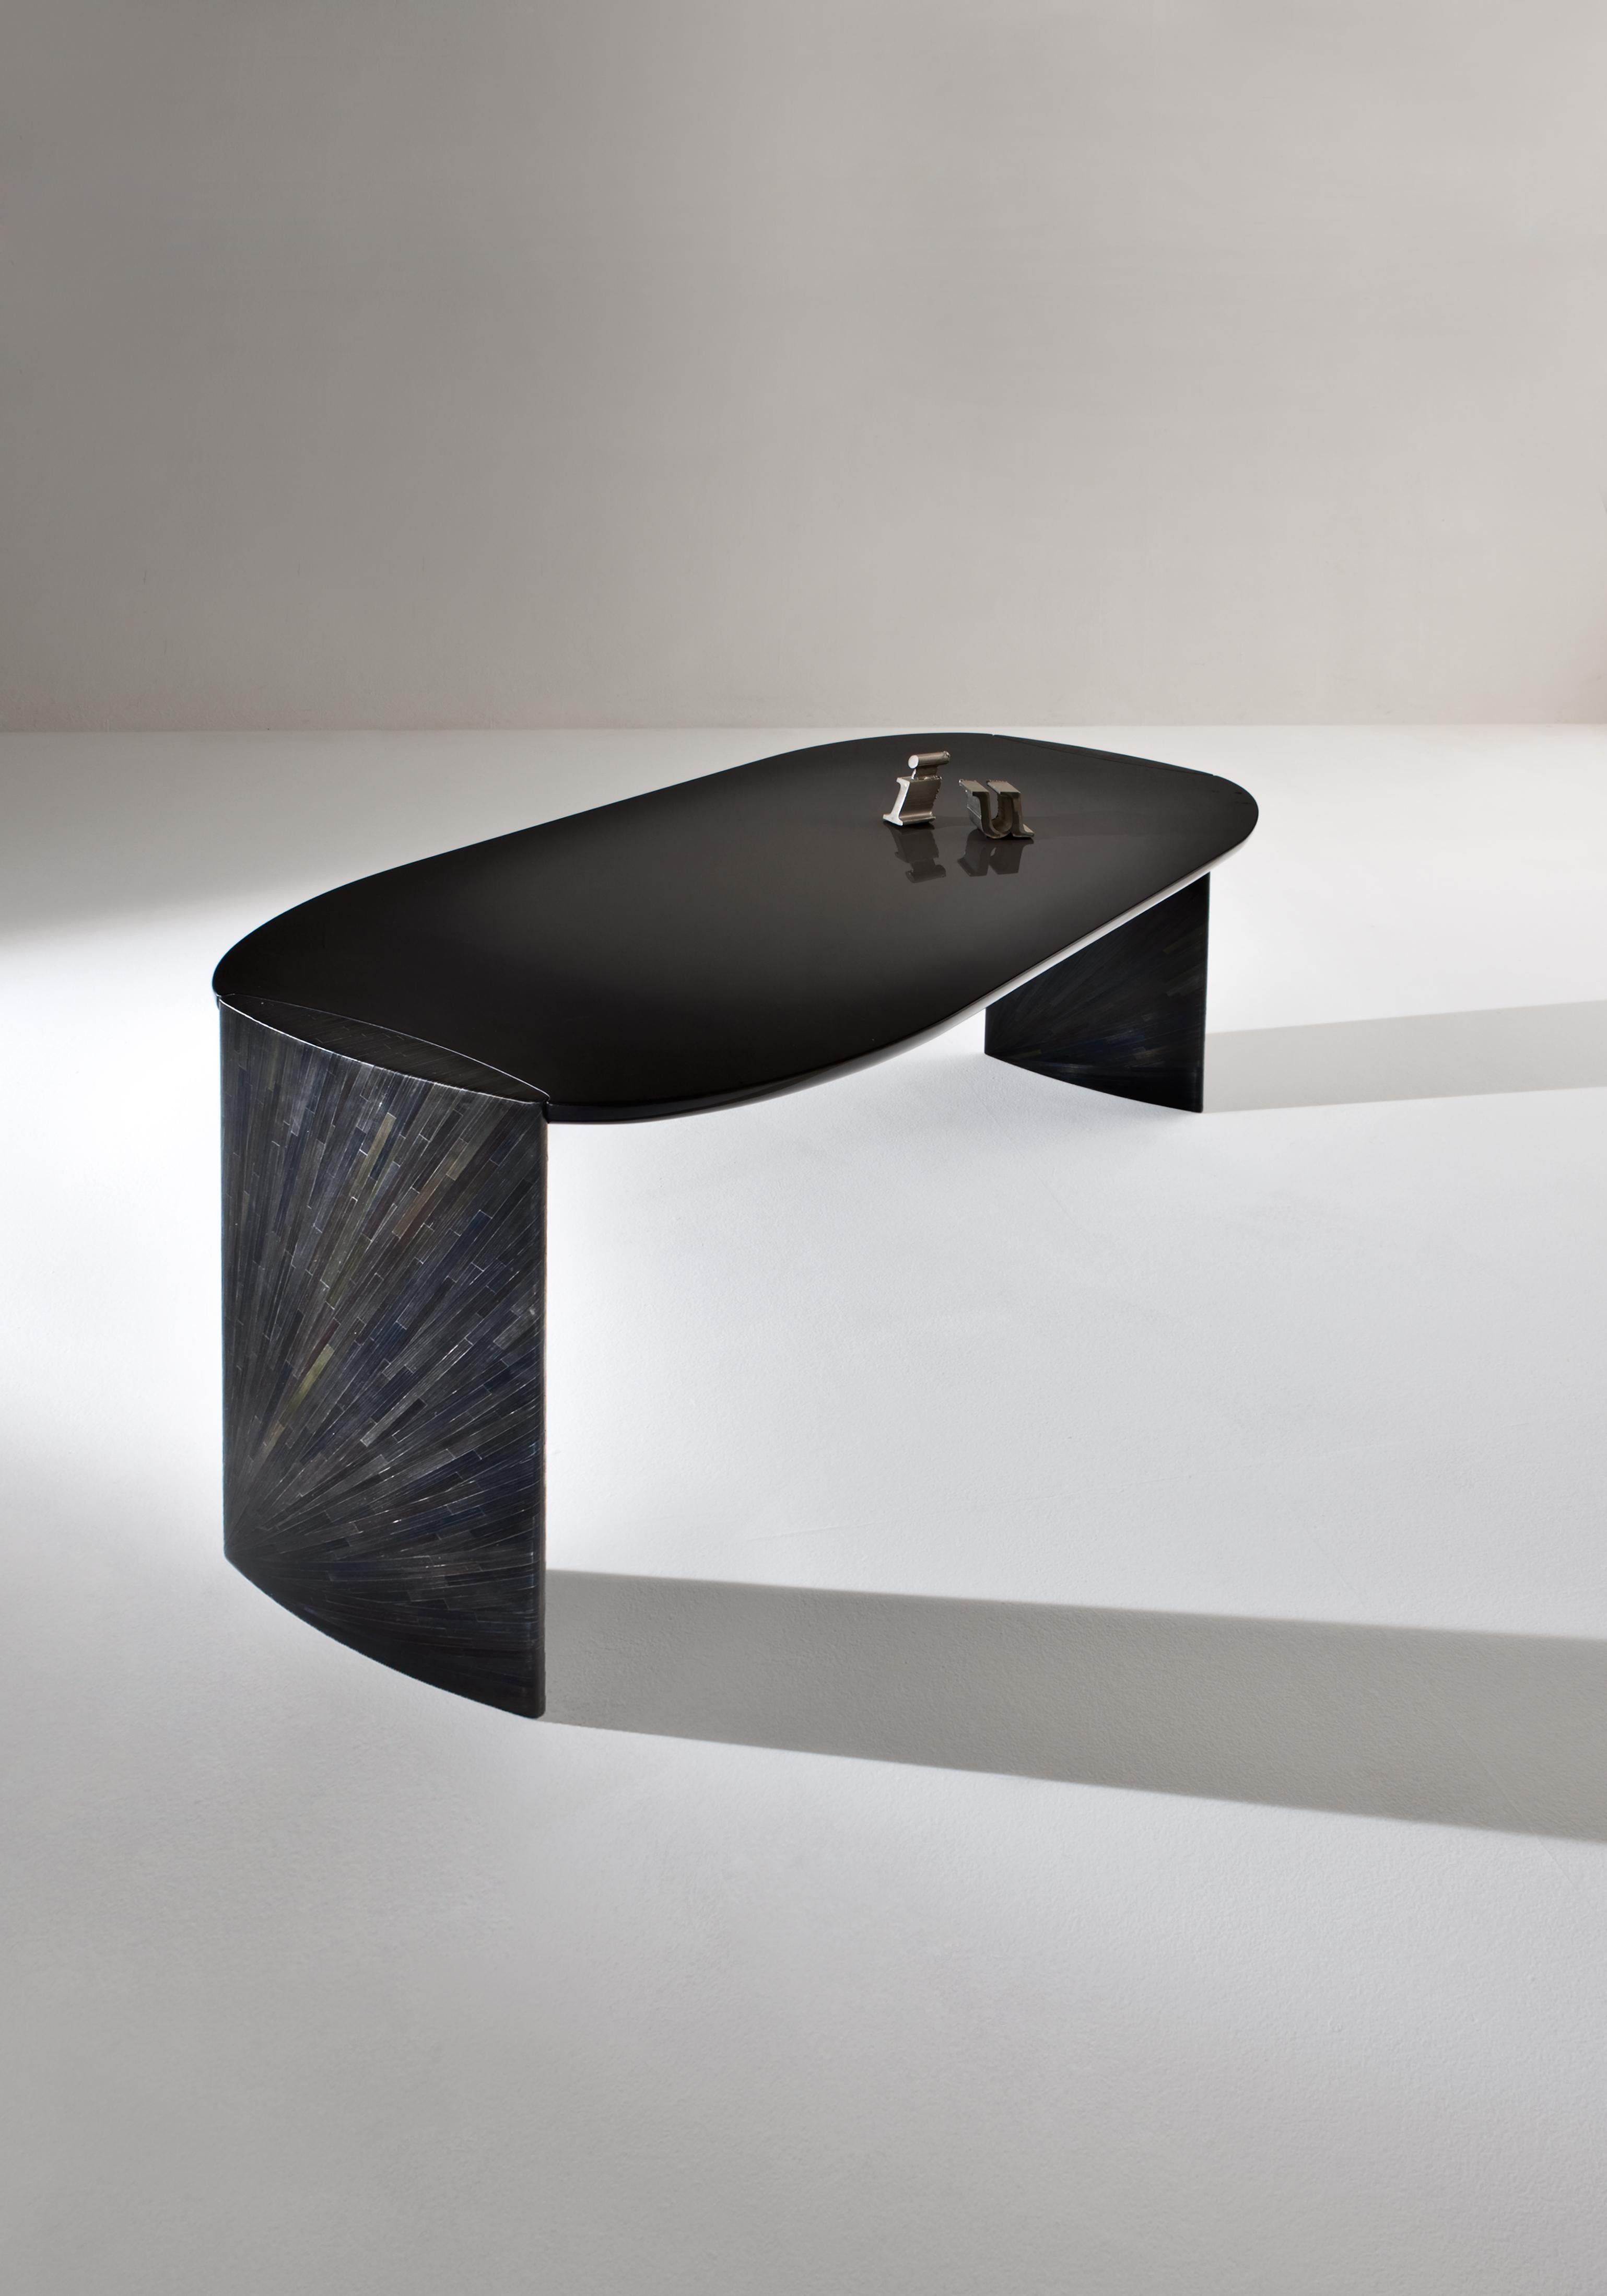 Family of desks with round-shaped top and legs with ovoidal section. Top in special shaded glossy lacquered wood and legs covered in a black rye-straw inlay.

Poe consoles stem from the desire to design a family of desks for contemplation, working